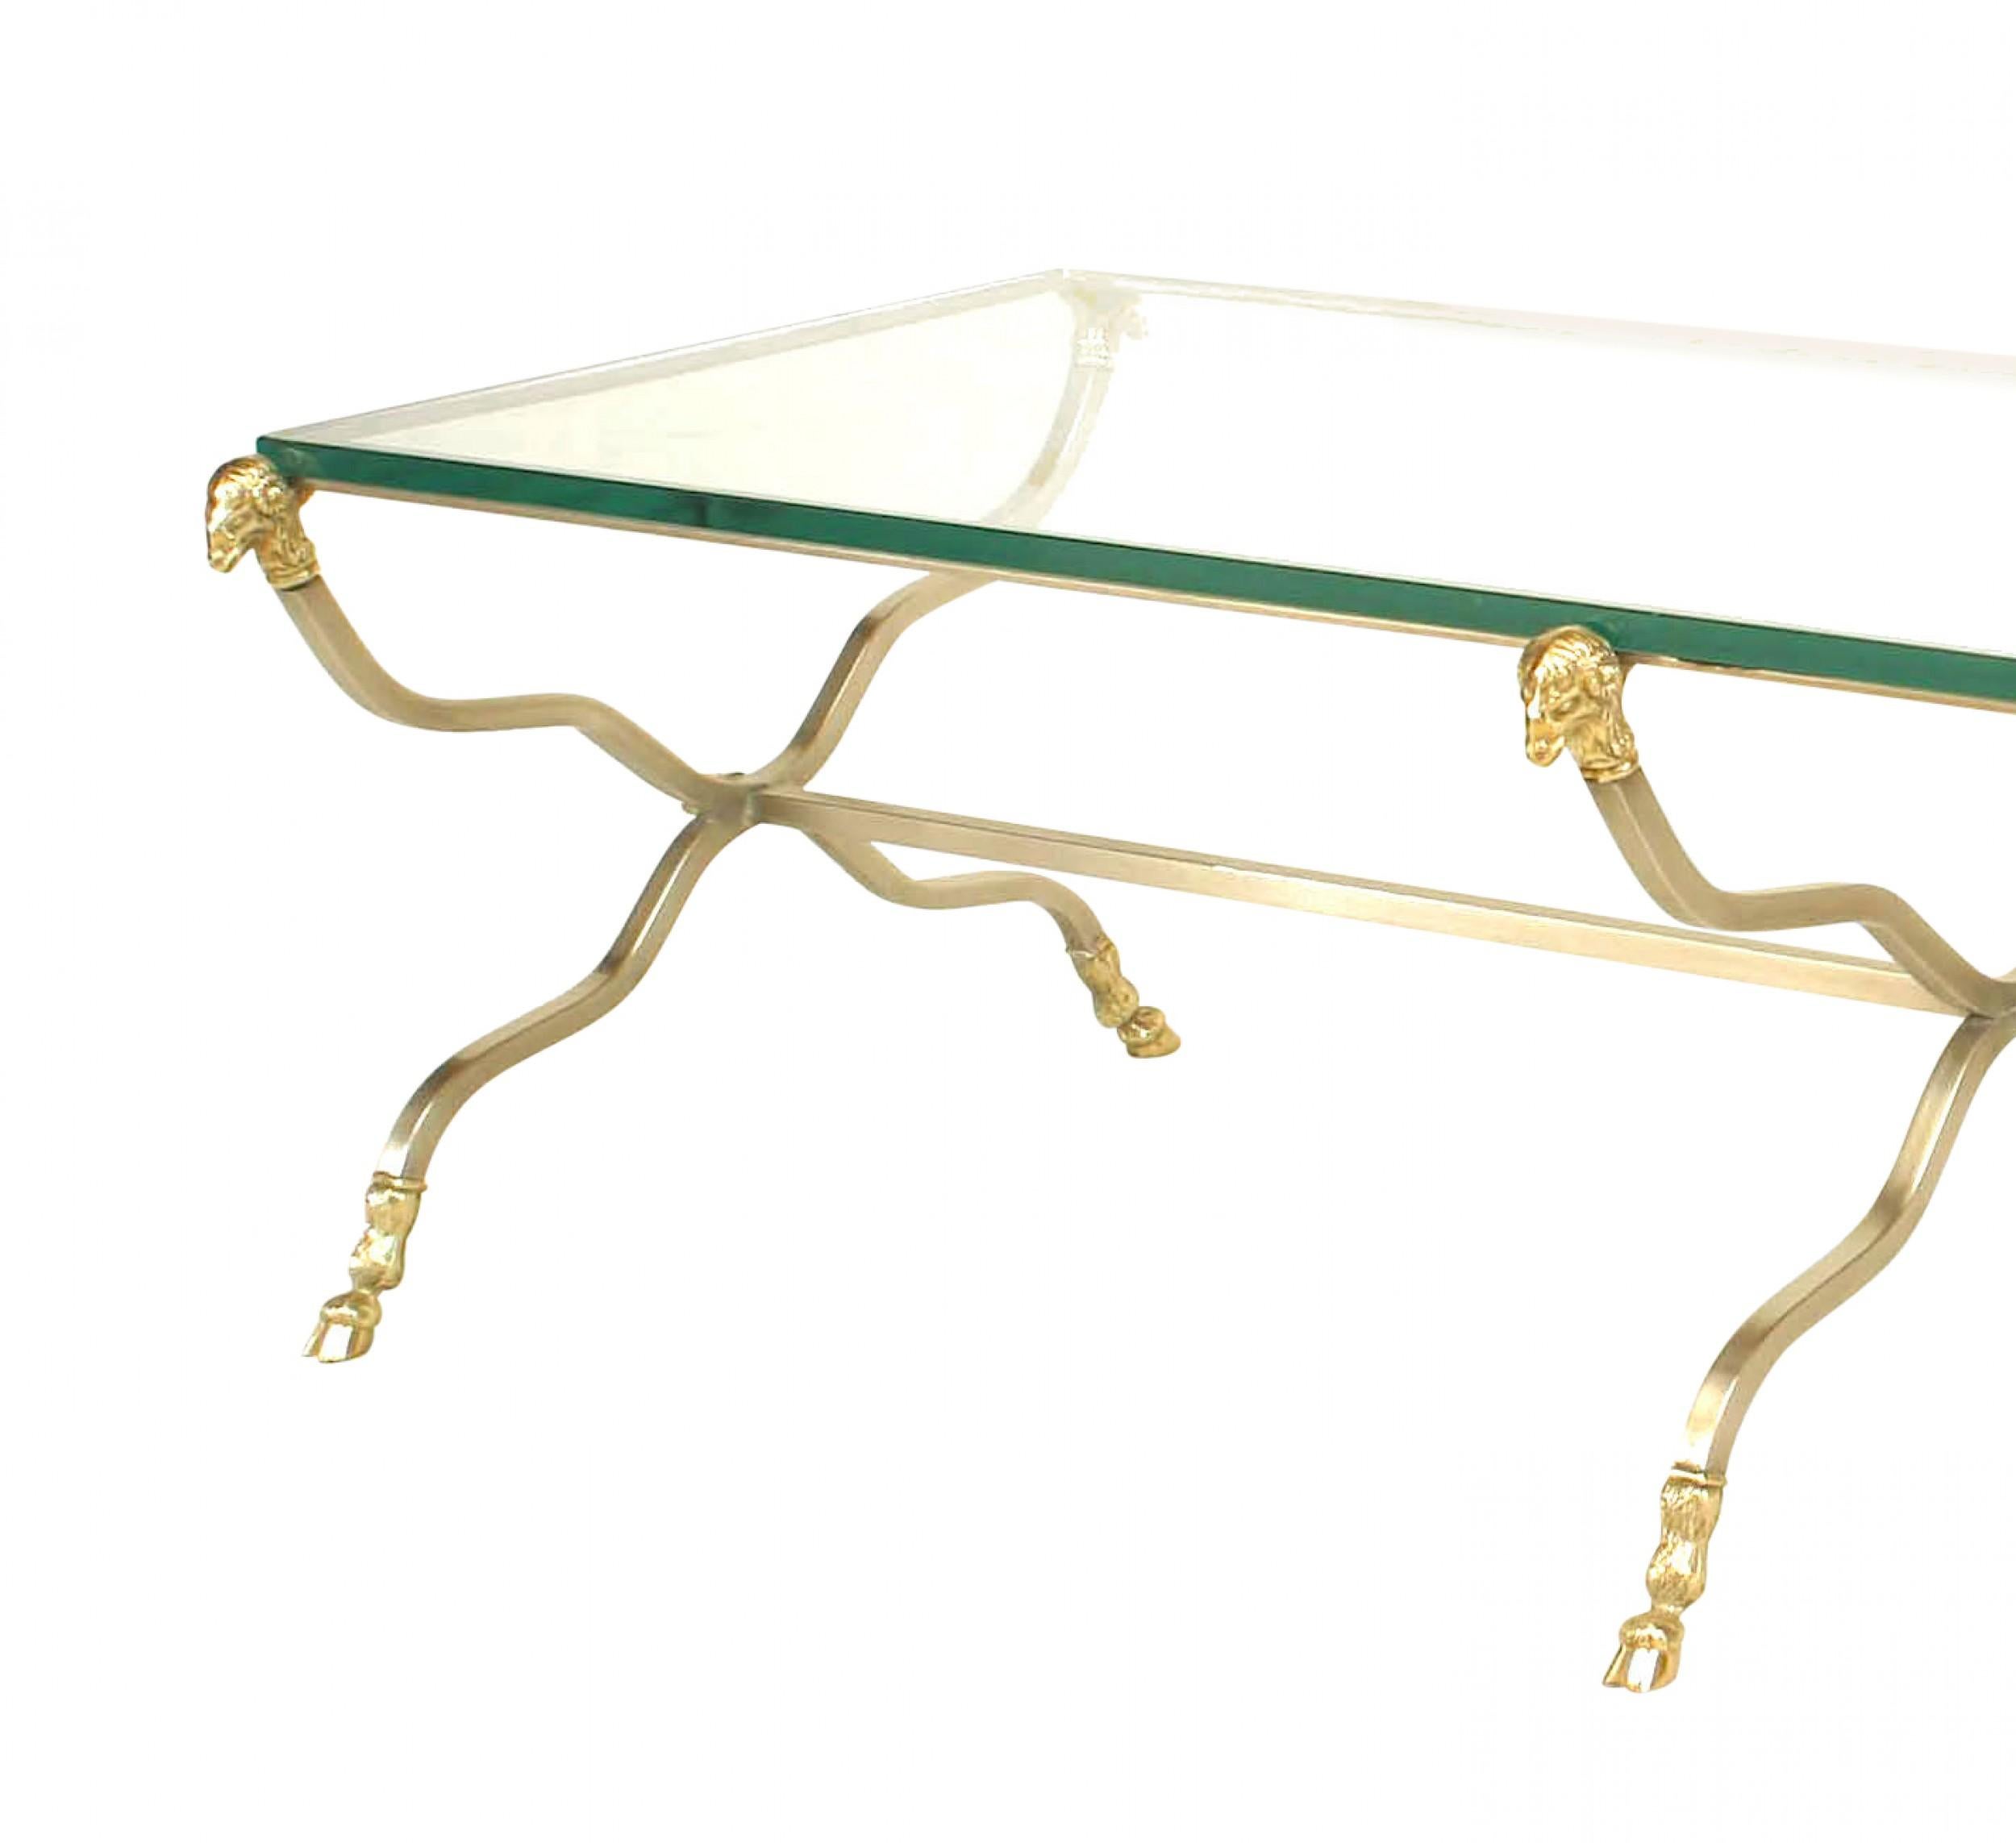 Maison Jansen French Directoire Style Brass and Glass Coffee Table For Sale 1